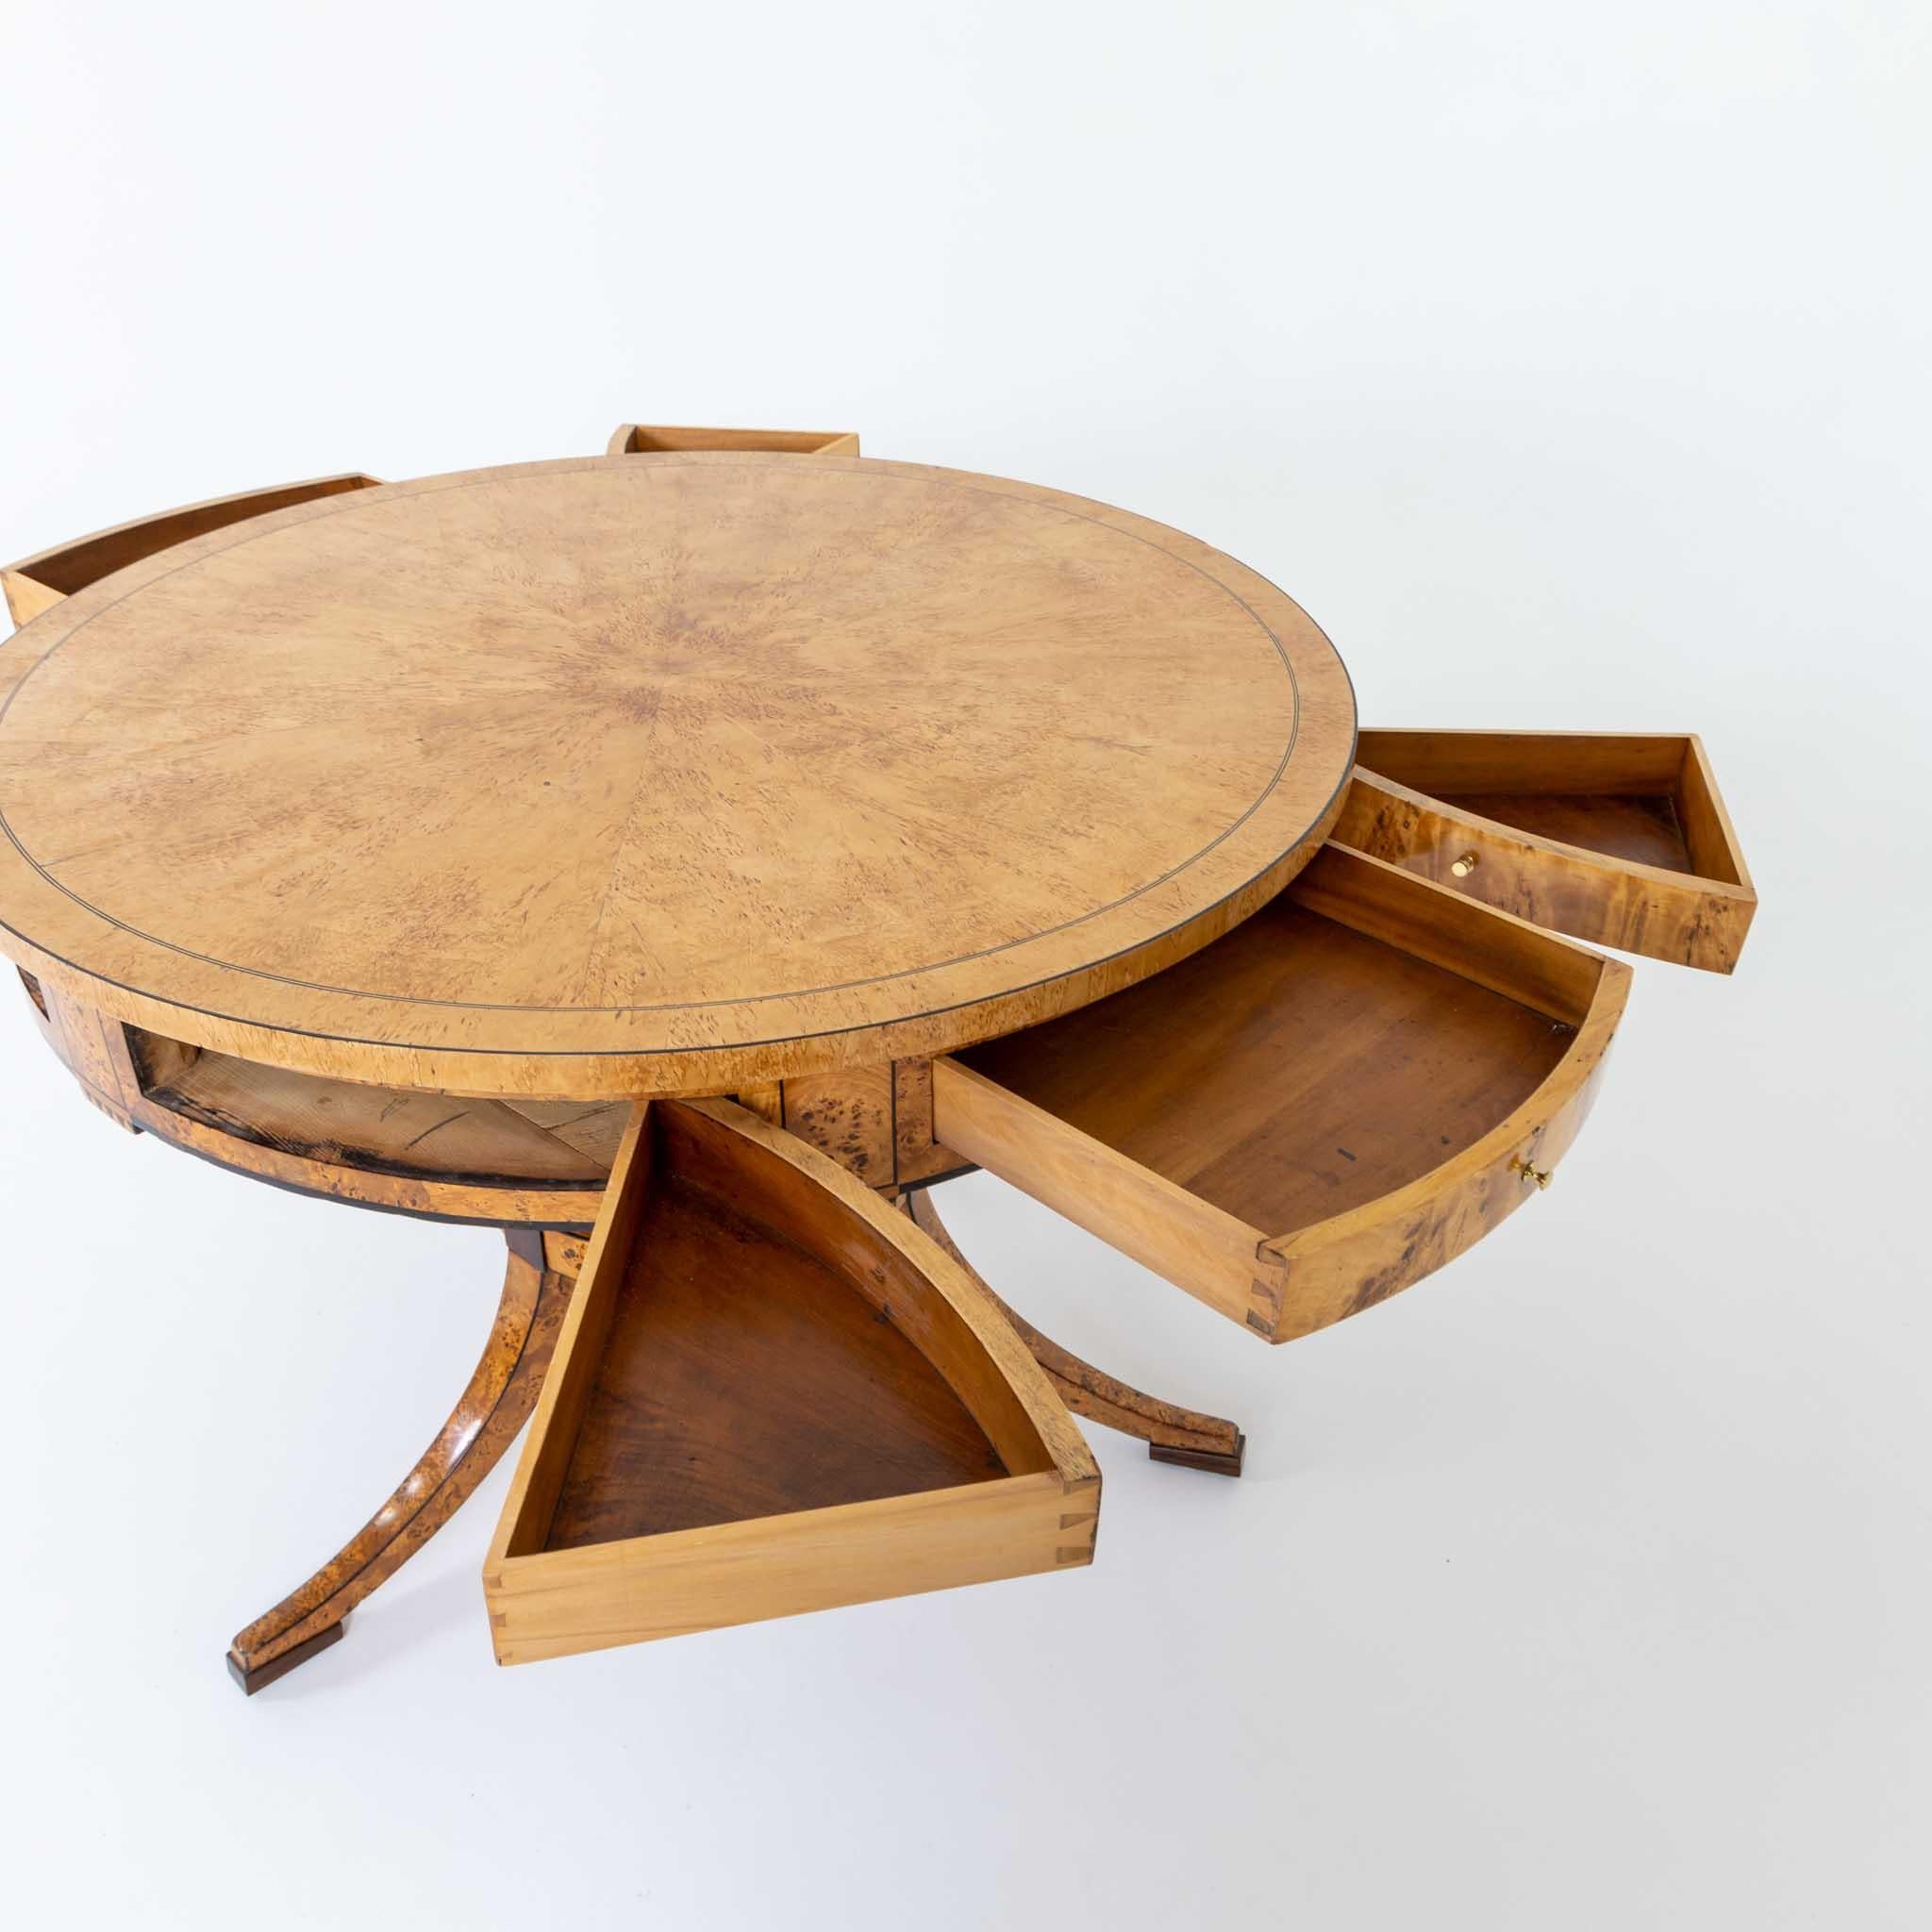 Early 19th Century Biedermeier Game Table in Birch, Baltic States, early 19th Century For Sale